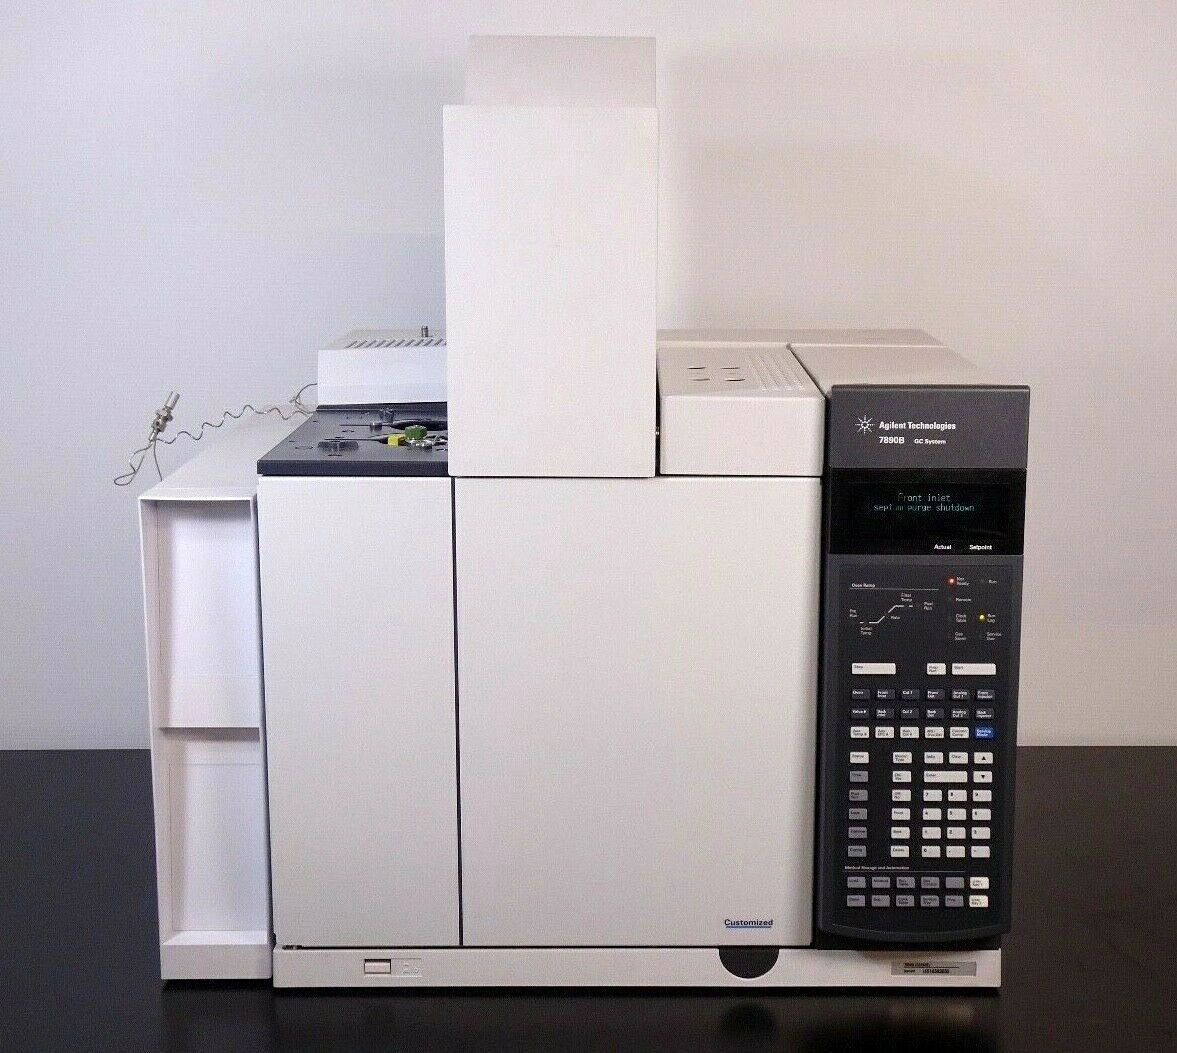 Agilent 7890B GC Large Valve Oven with valves, FID and dual TCD